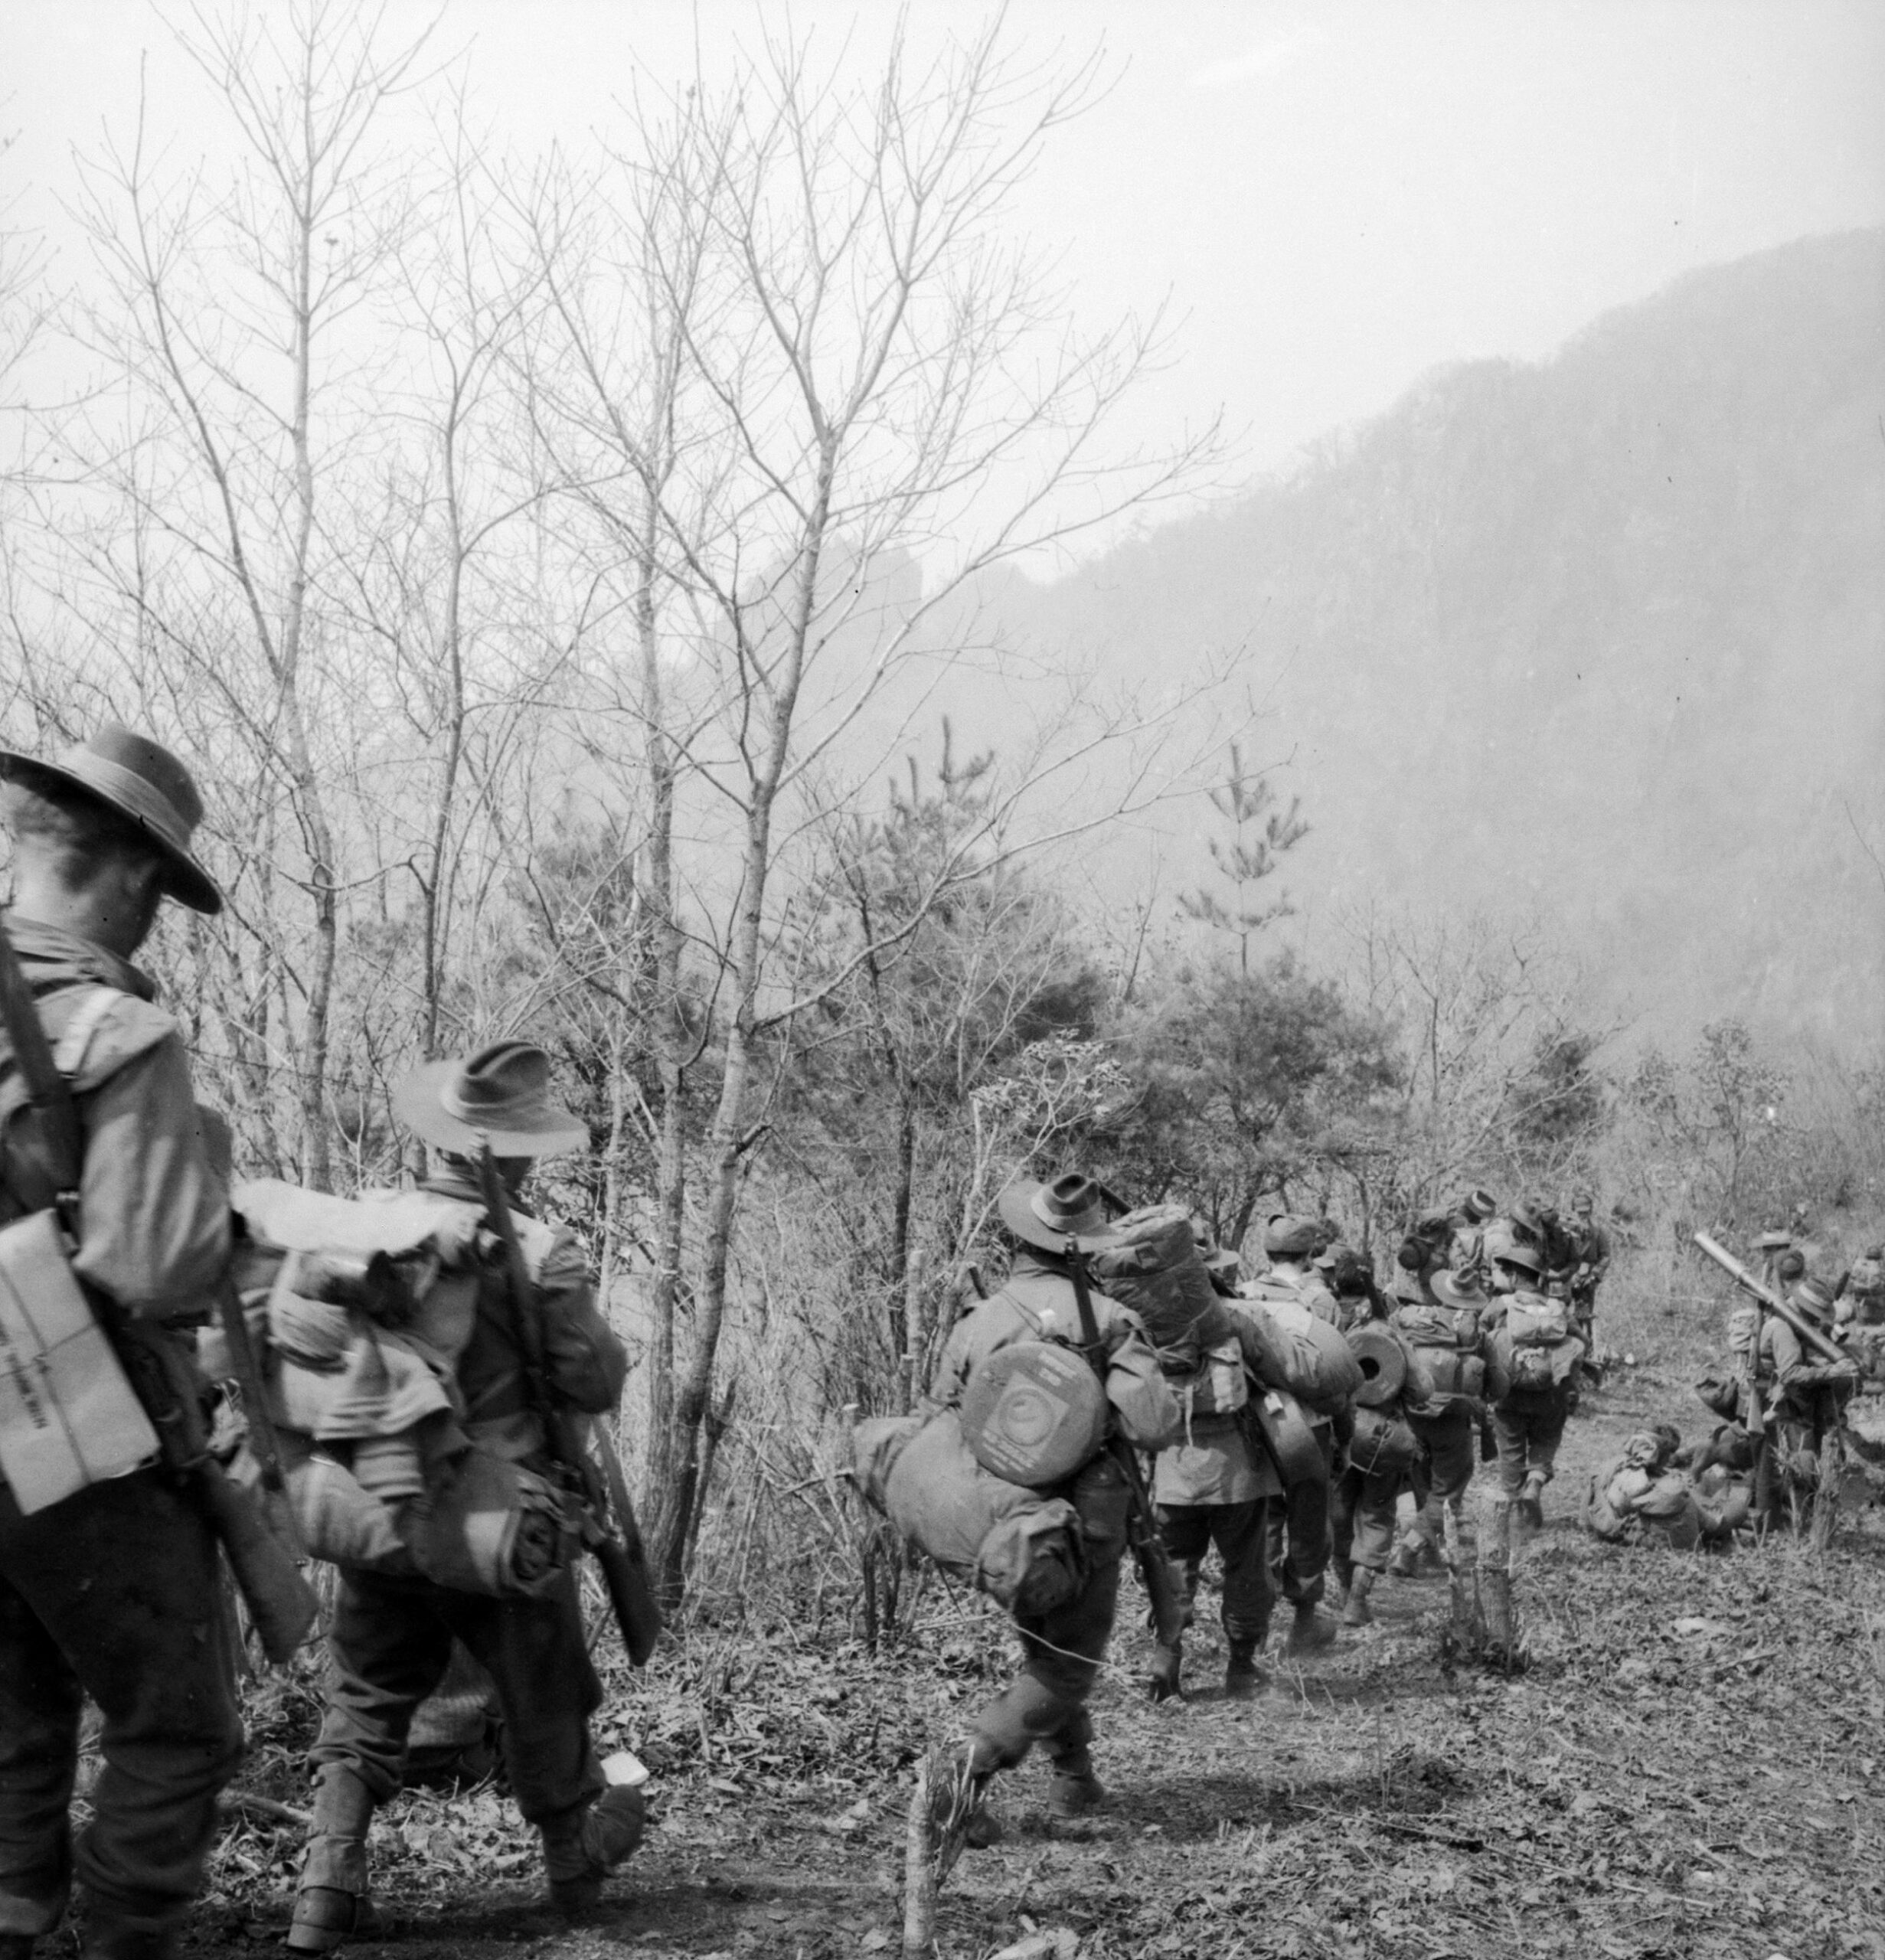 Loaded with gear, members of A Company, 3rd Battalion, Royal Australian Regiment prepare to counterattack the Chinese on Hill 504.